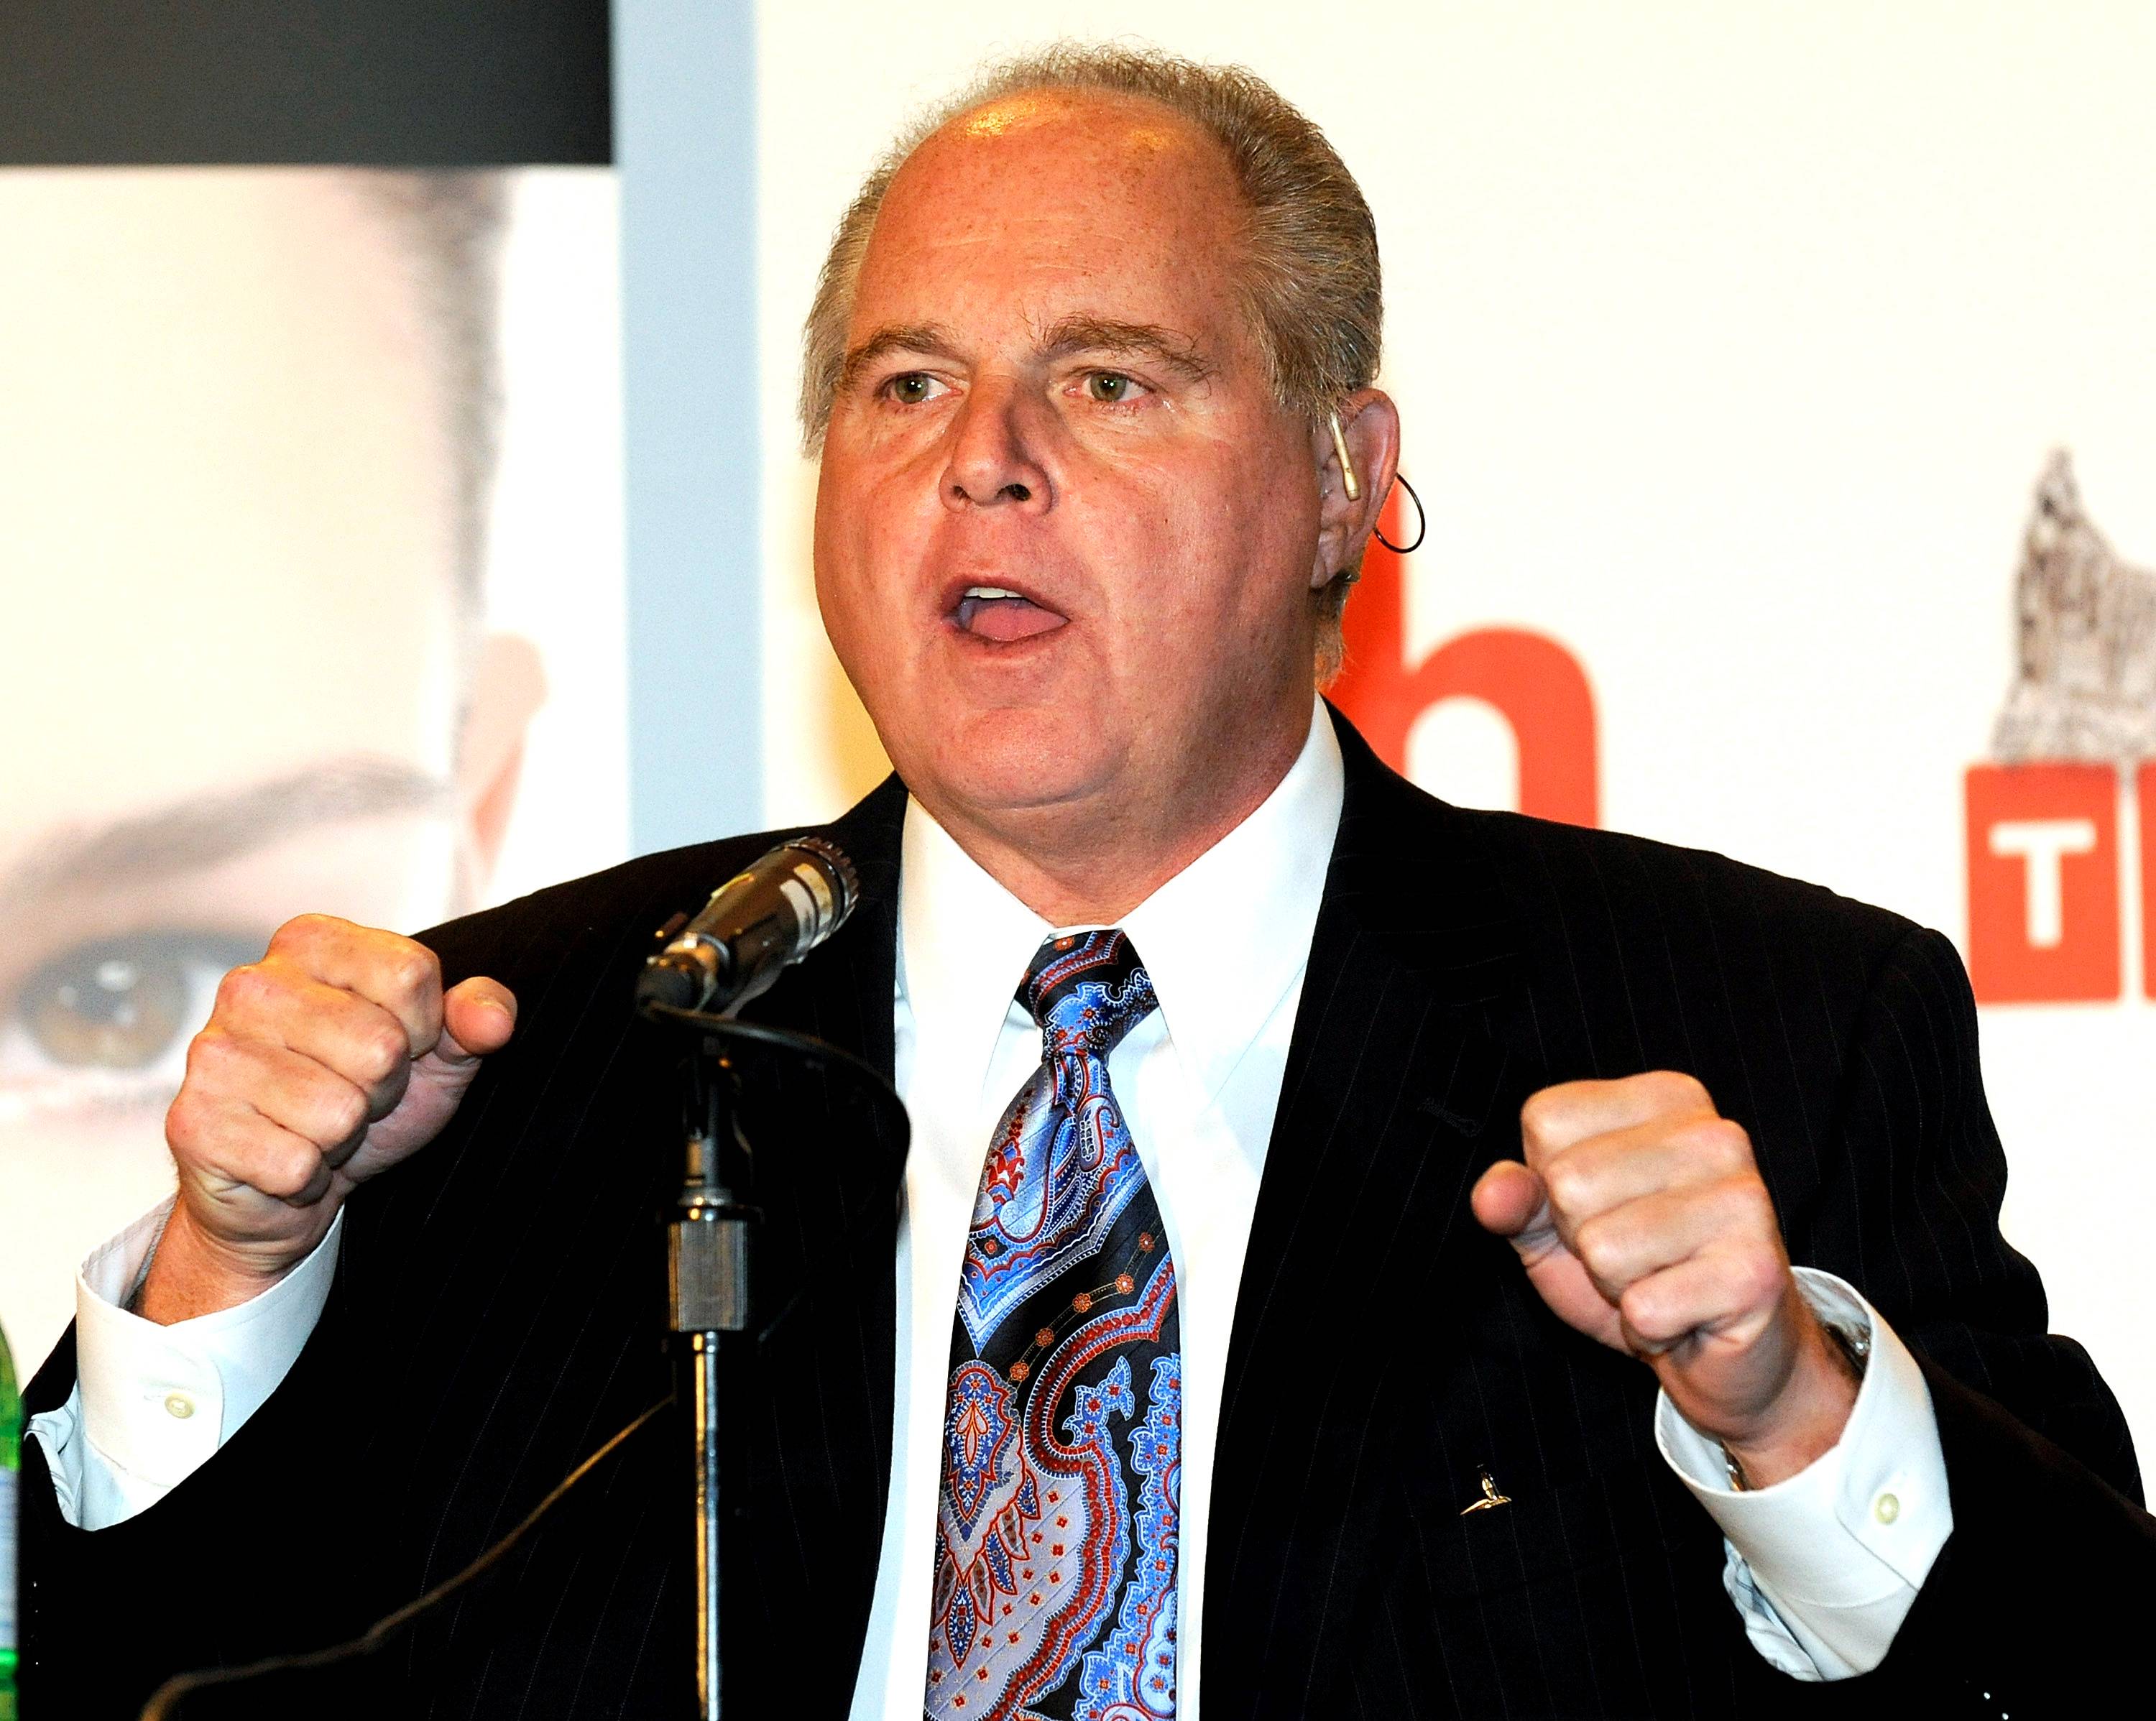 Rush Limbaugh - Radio talk show host Rush Limbaugh in August compared President Obama to Kraft Foods’ new Triple Double Oreo that combines a layer of vanilla cream, a layer of chocolate cream and three chocolate wafers. Limbaugh said that soon the cookie would be called the Or-Bam-eo.(Photo: Ethan Miller/Getty Images)